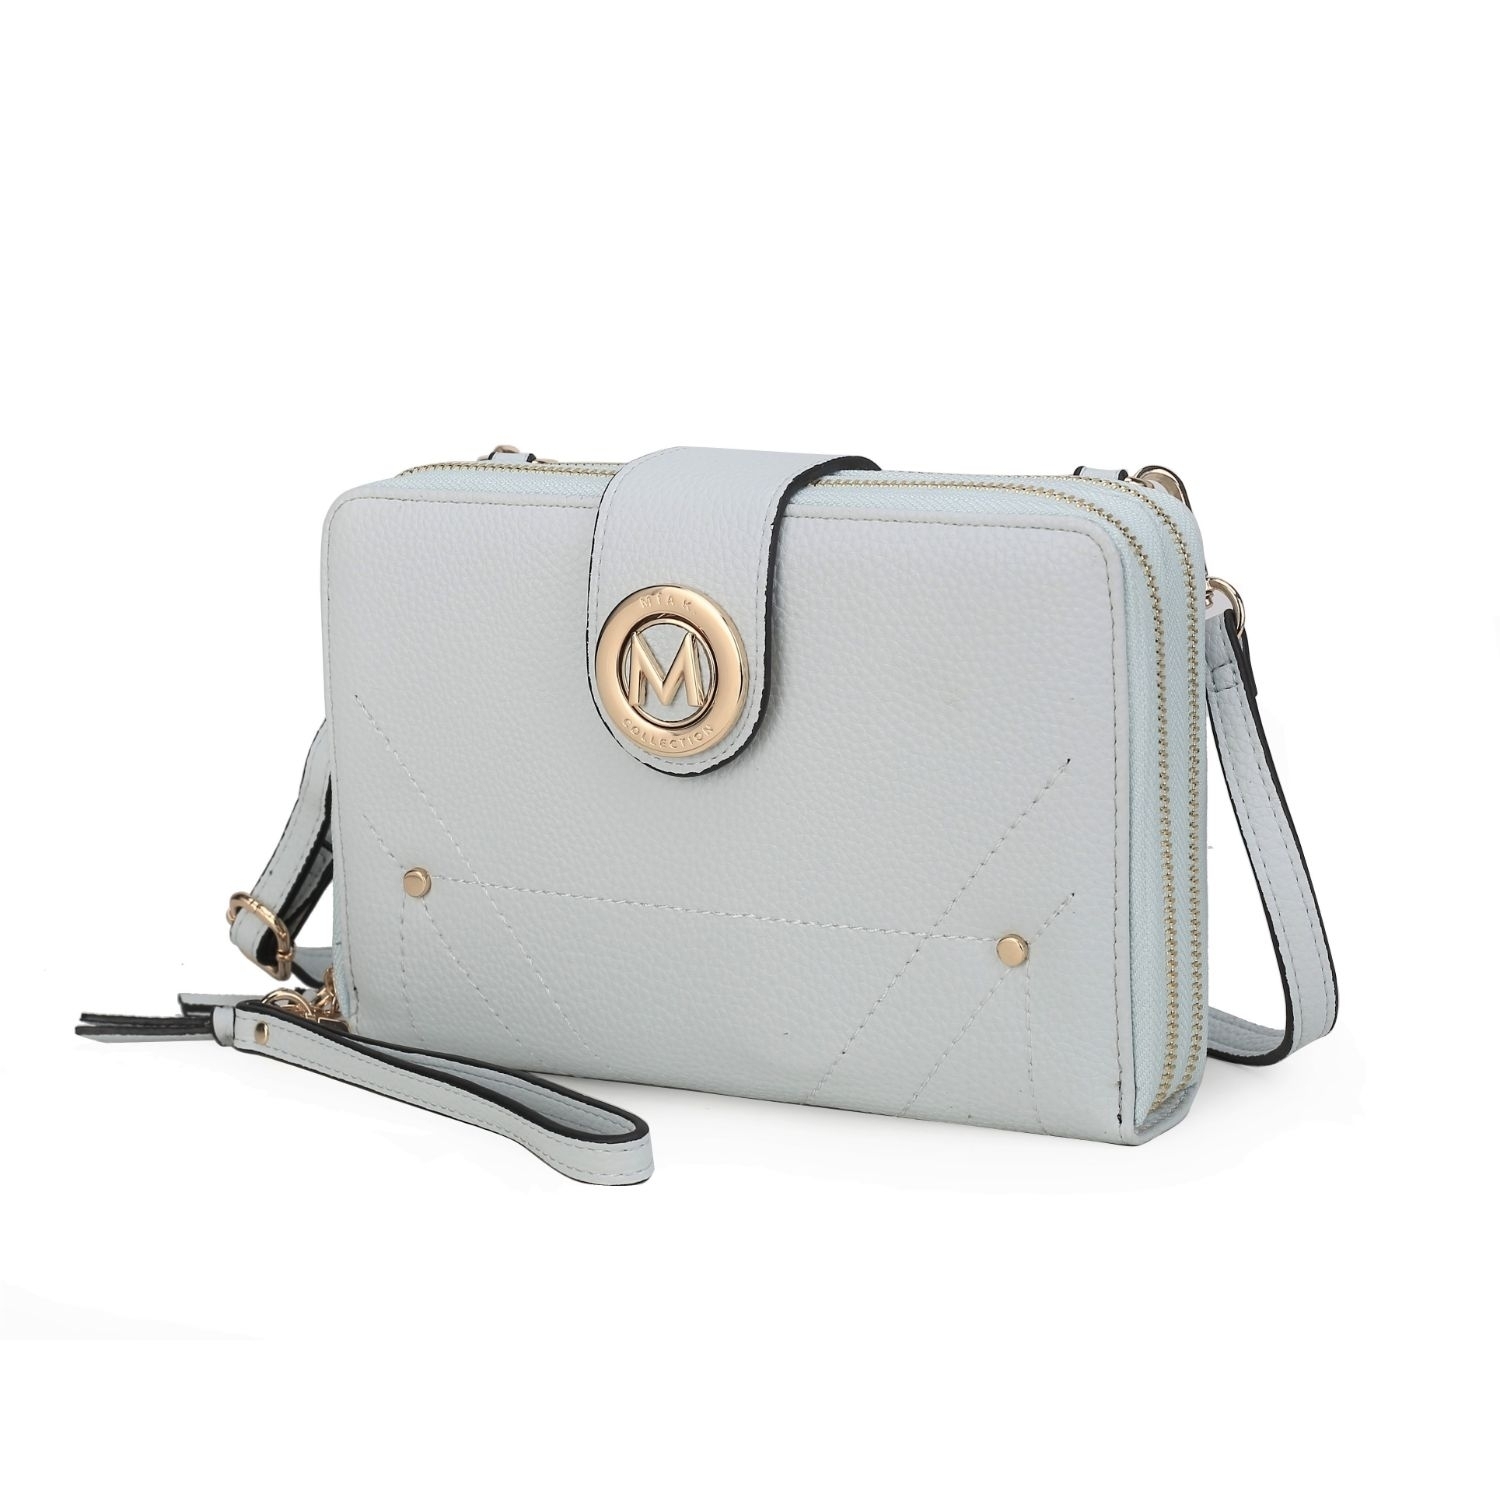 MKF Collection Sage Cell-phone - Wallet Crossbody Handbag With Optional Wristlet By Mia K - Mustard